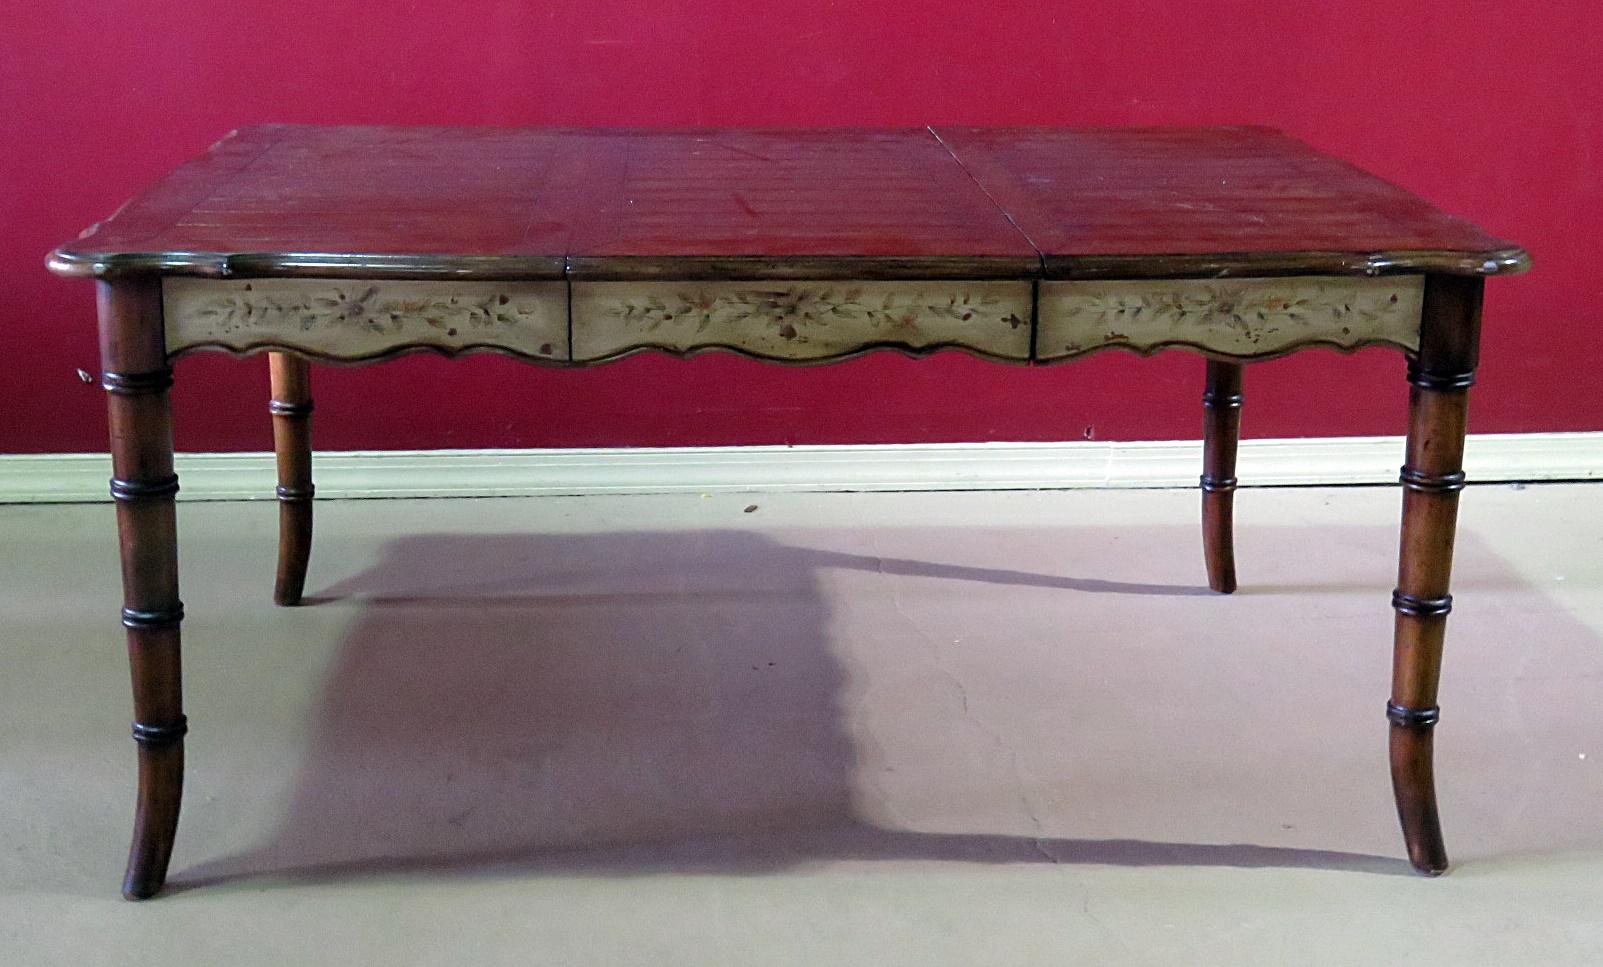 This is a unique and fanciful French Faux bamboo distressed painted dining room table with two silverware drawers and one 20 inch leaf. The table has been designed to look antique and has a high quality painted finish and strong sturdy construction.